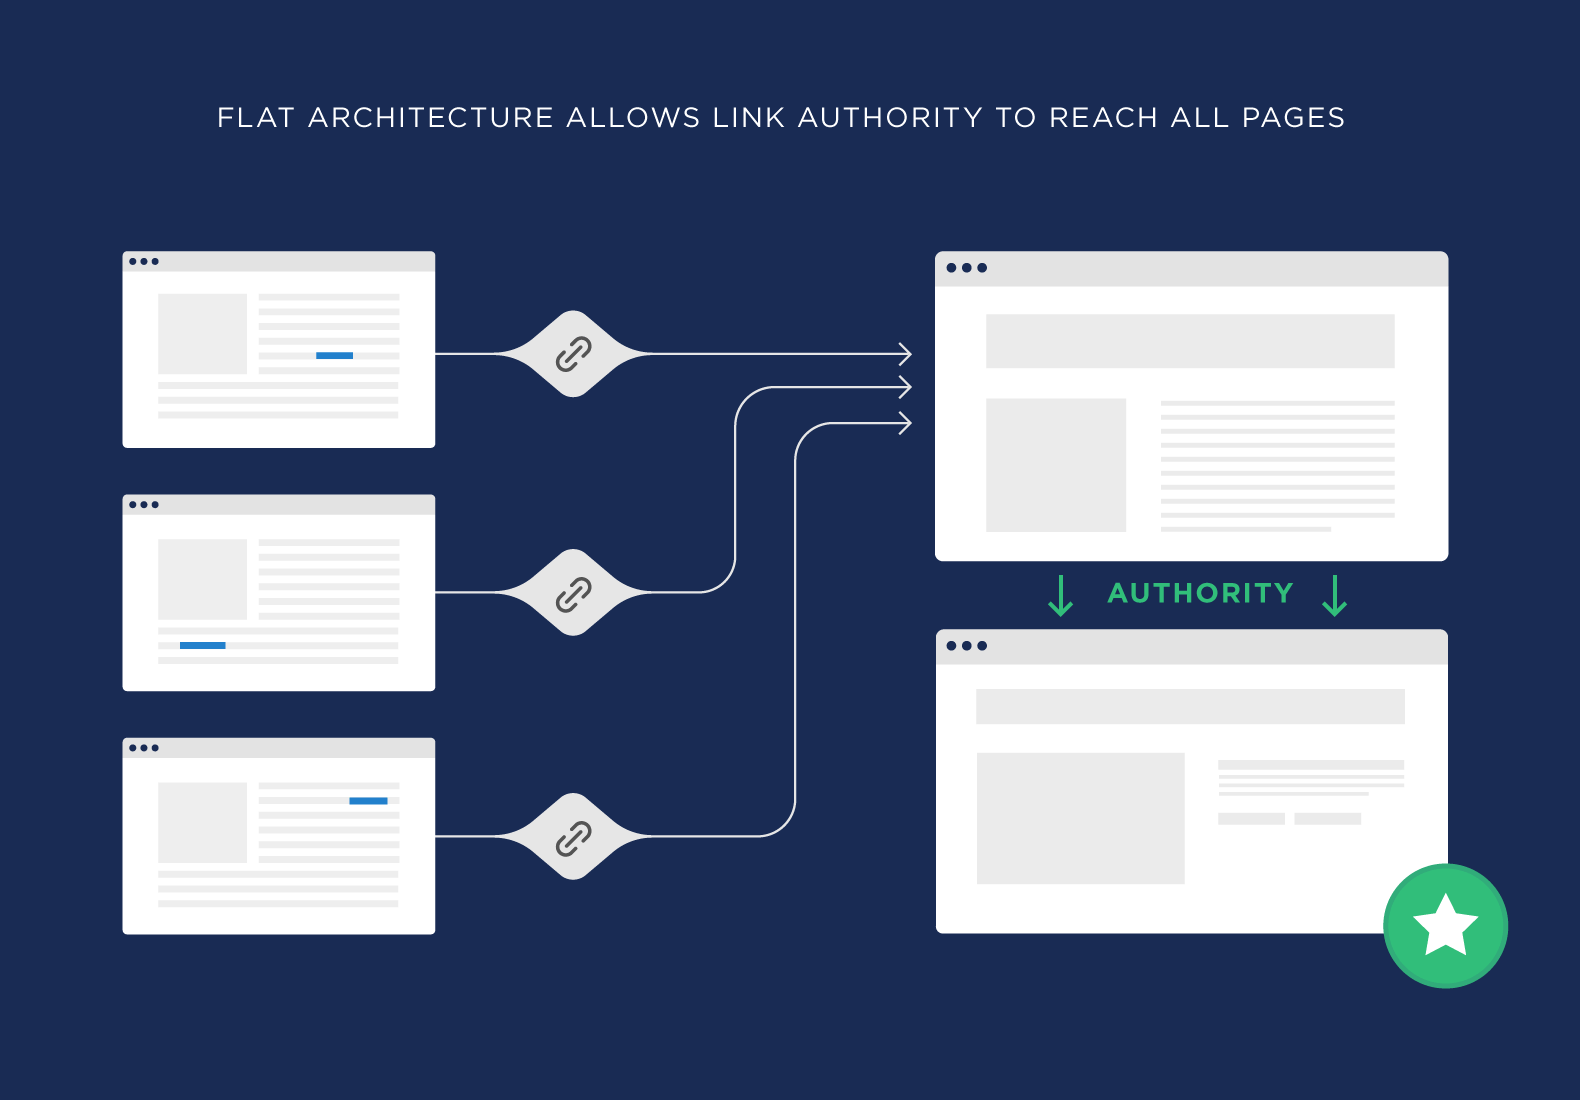 Flat architecture allows link authority to reach all pages